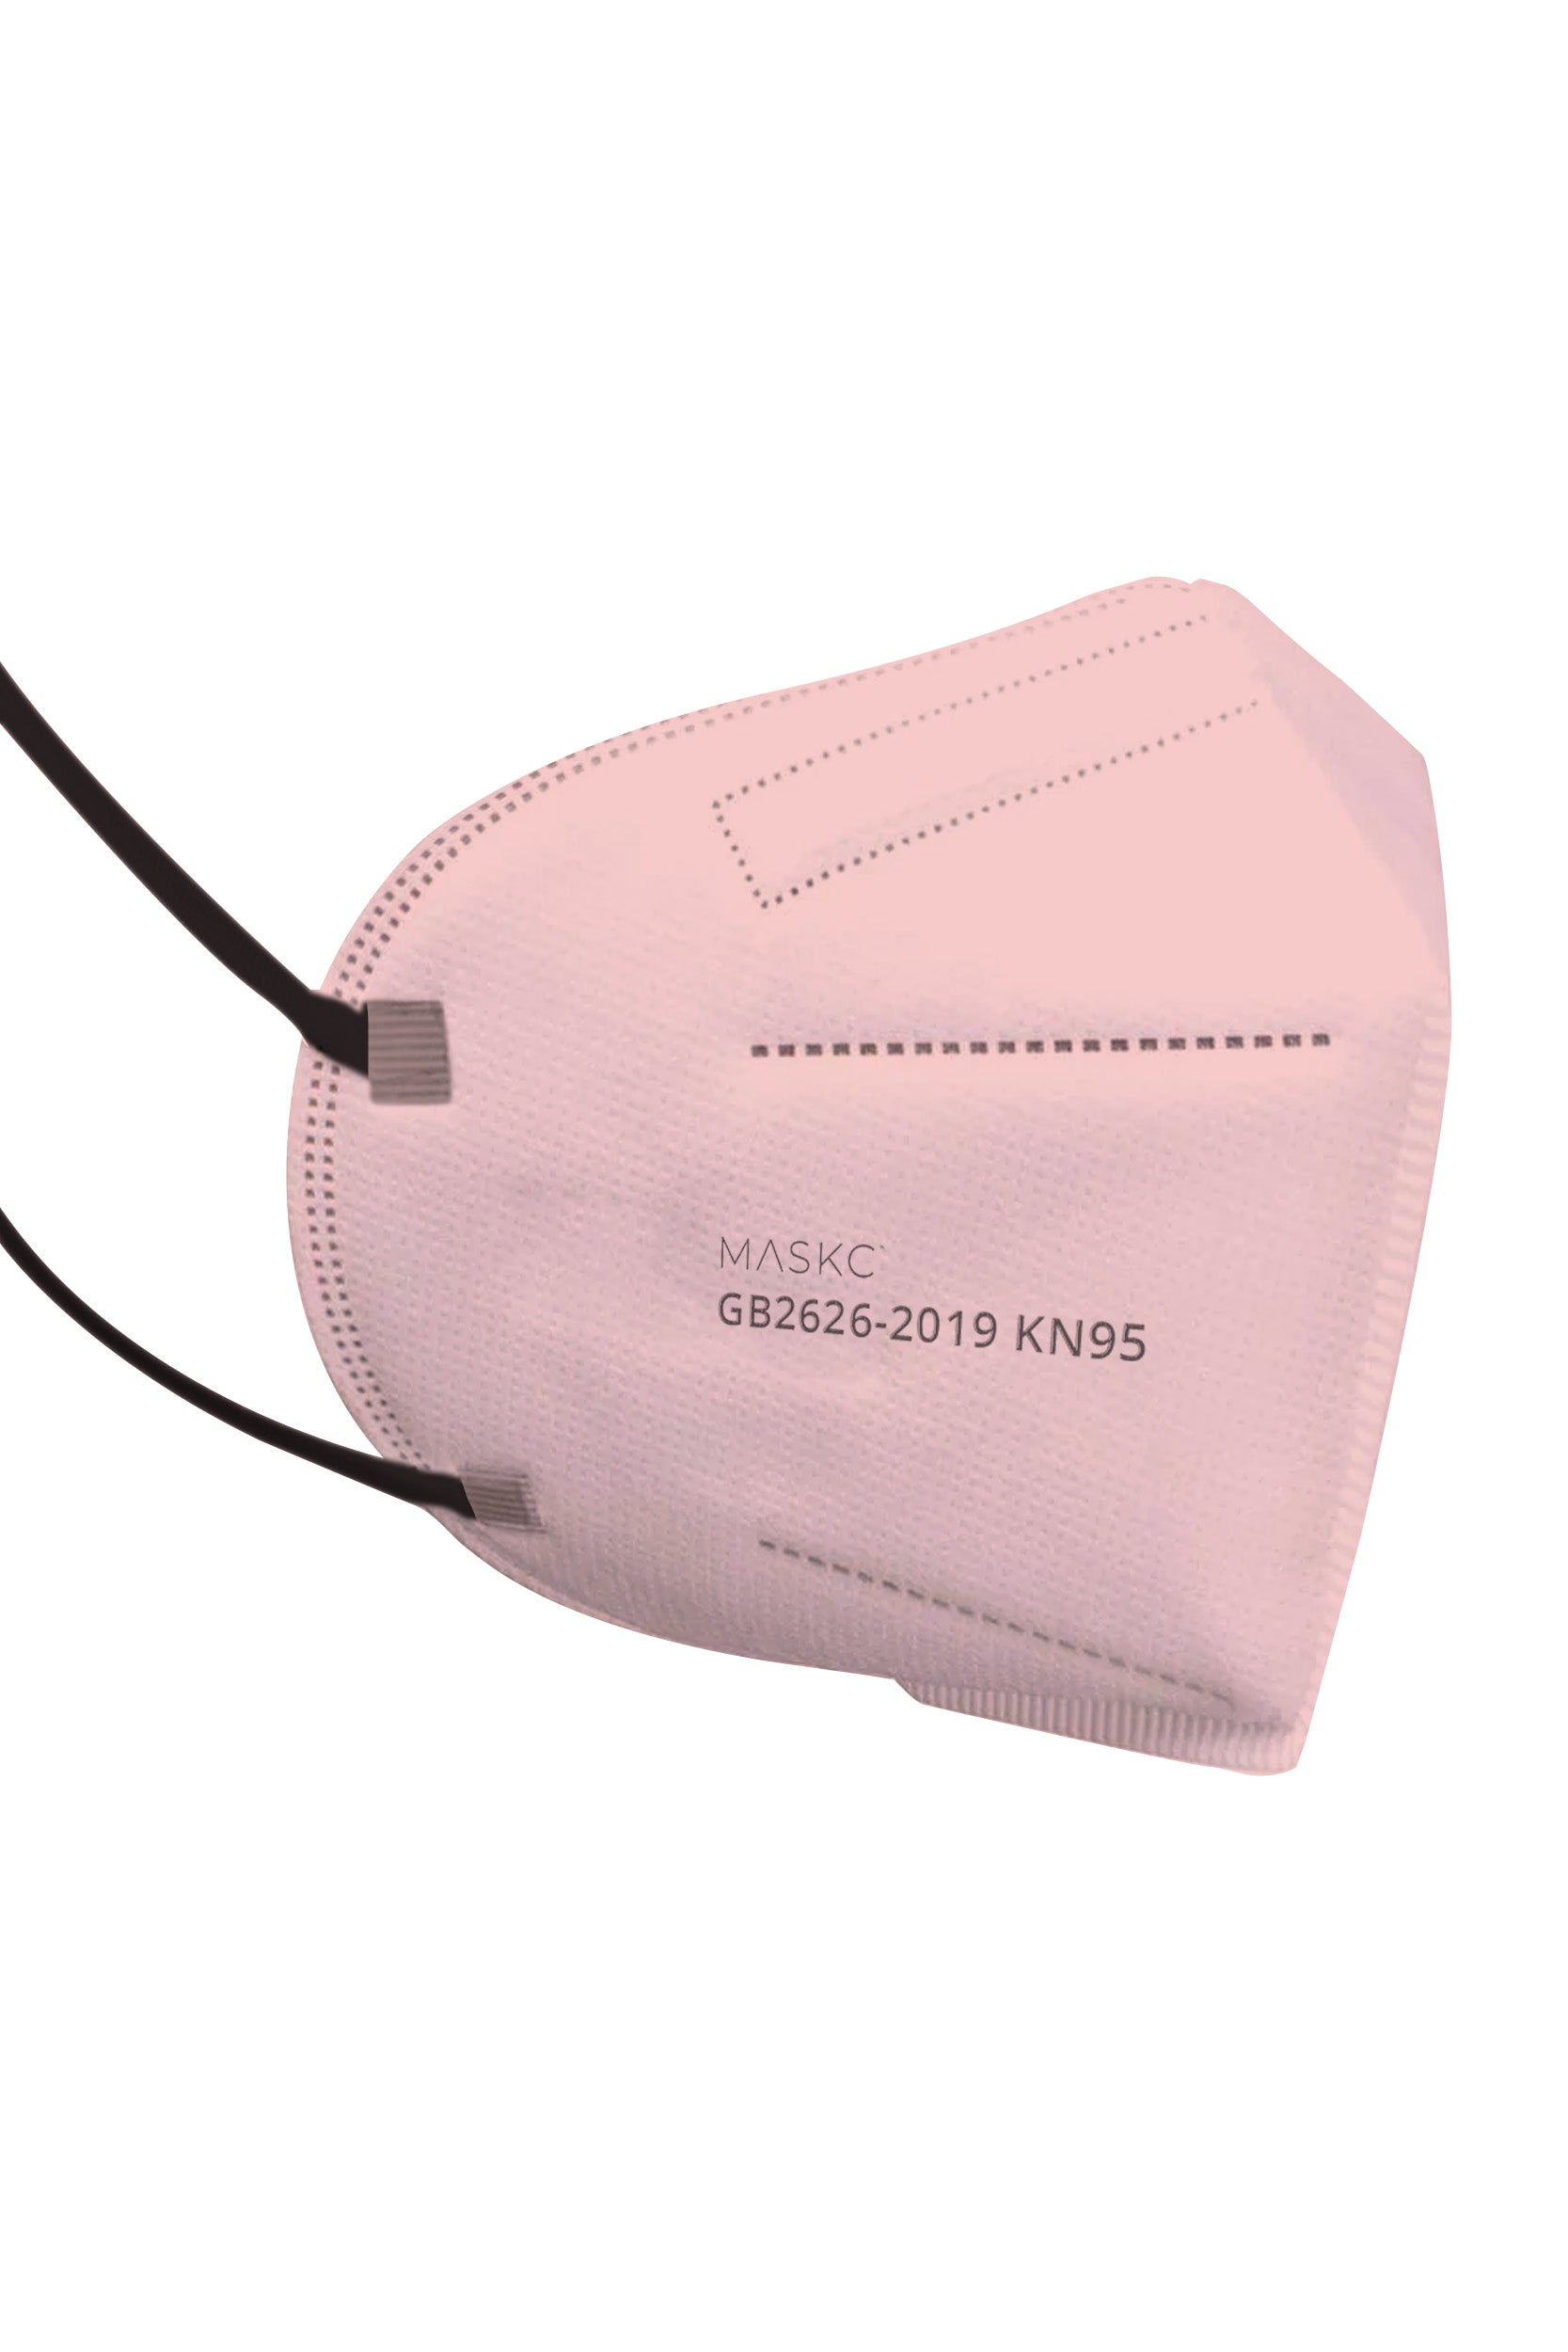 Stylish Kids Size Light Pink KN95 face mask, with soft black ear loops and high quality fabric. 